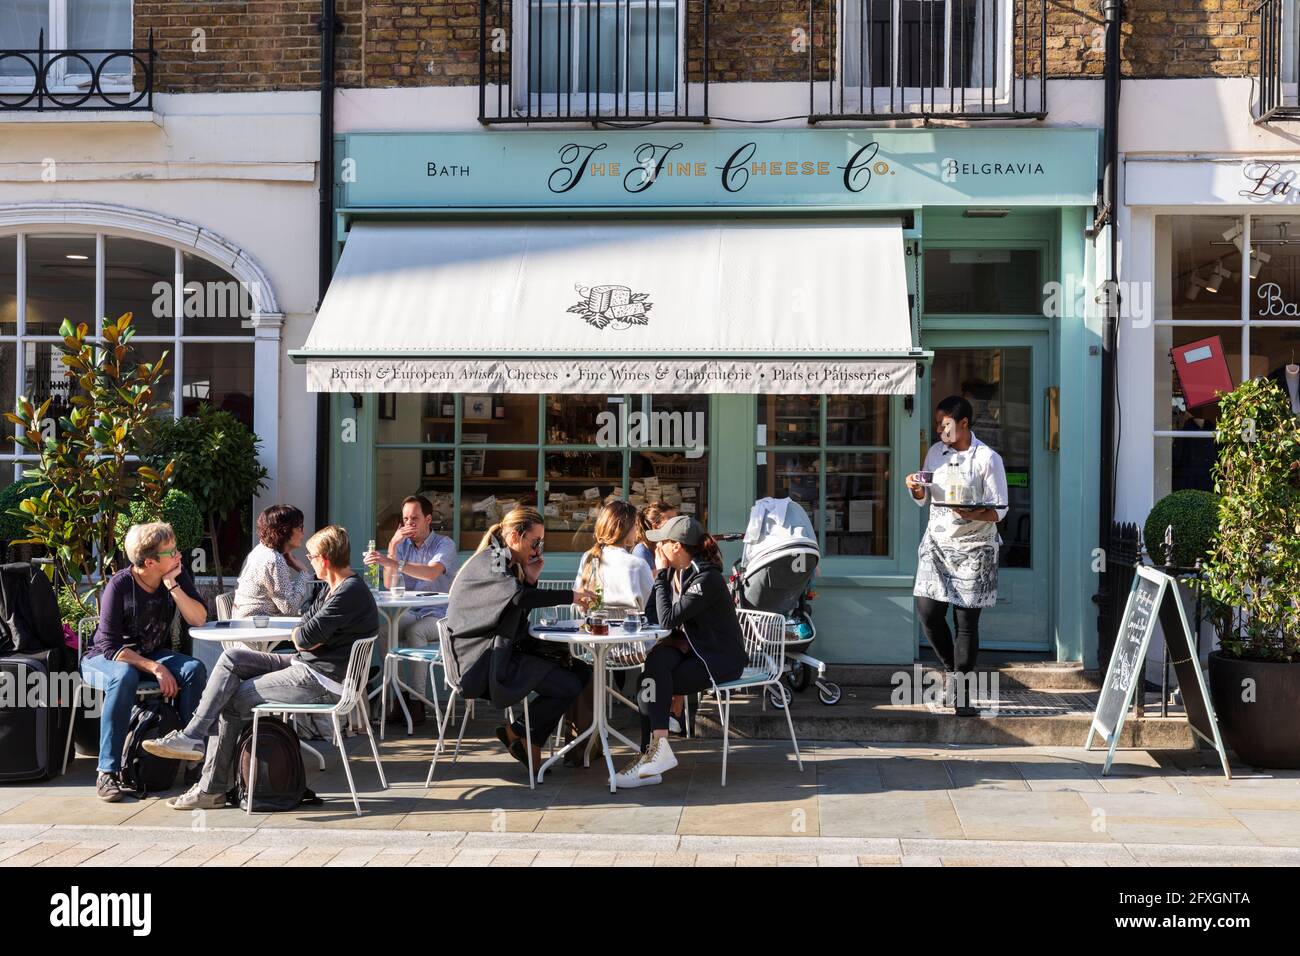 People dining outside The Fine Cheese Co. in Motcomb Street, Belgravia, London, UK. Stock Photo